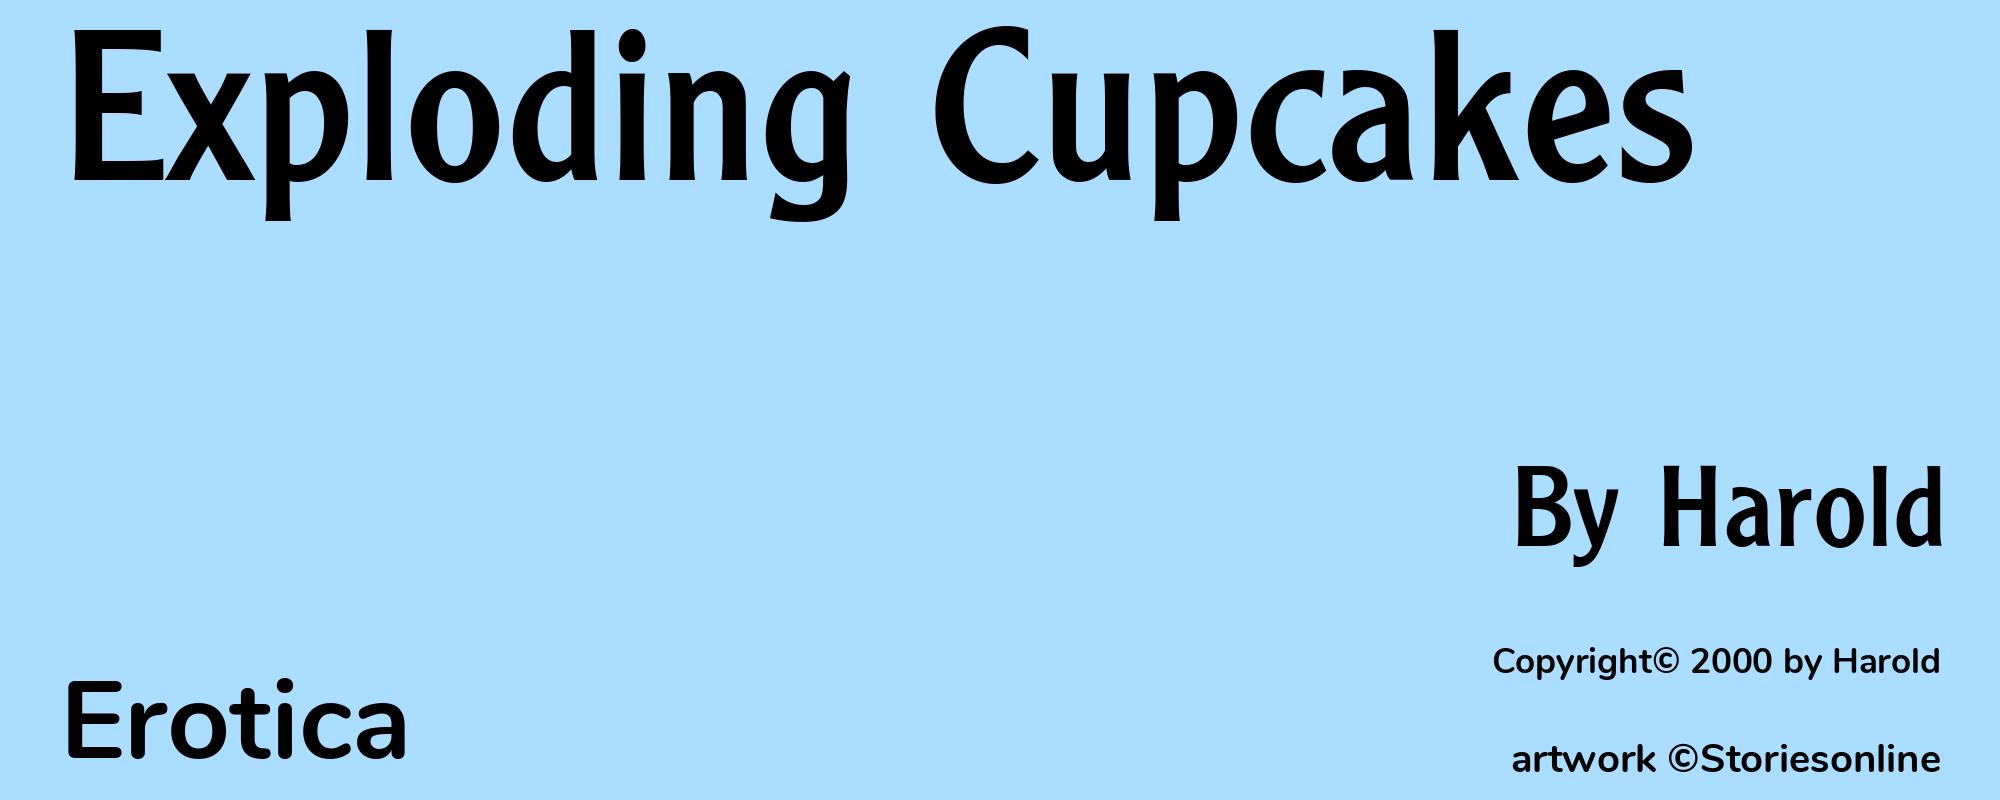 Exploding Cupcakes - Cover